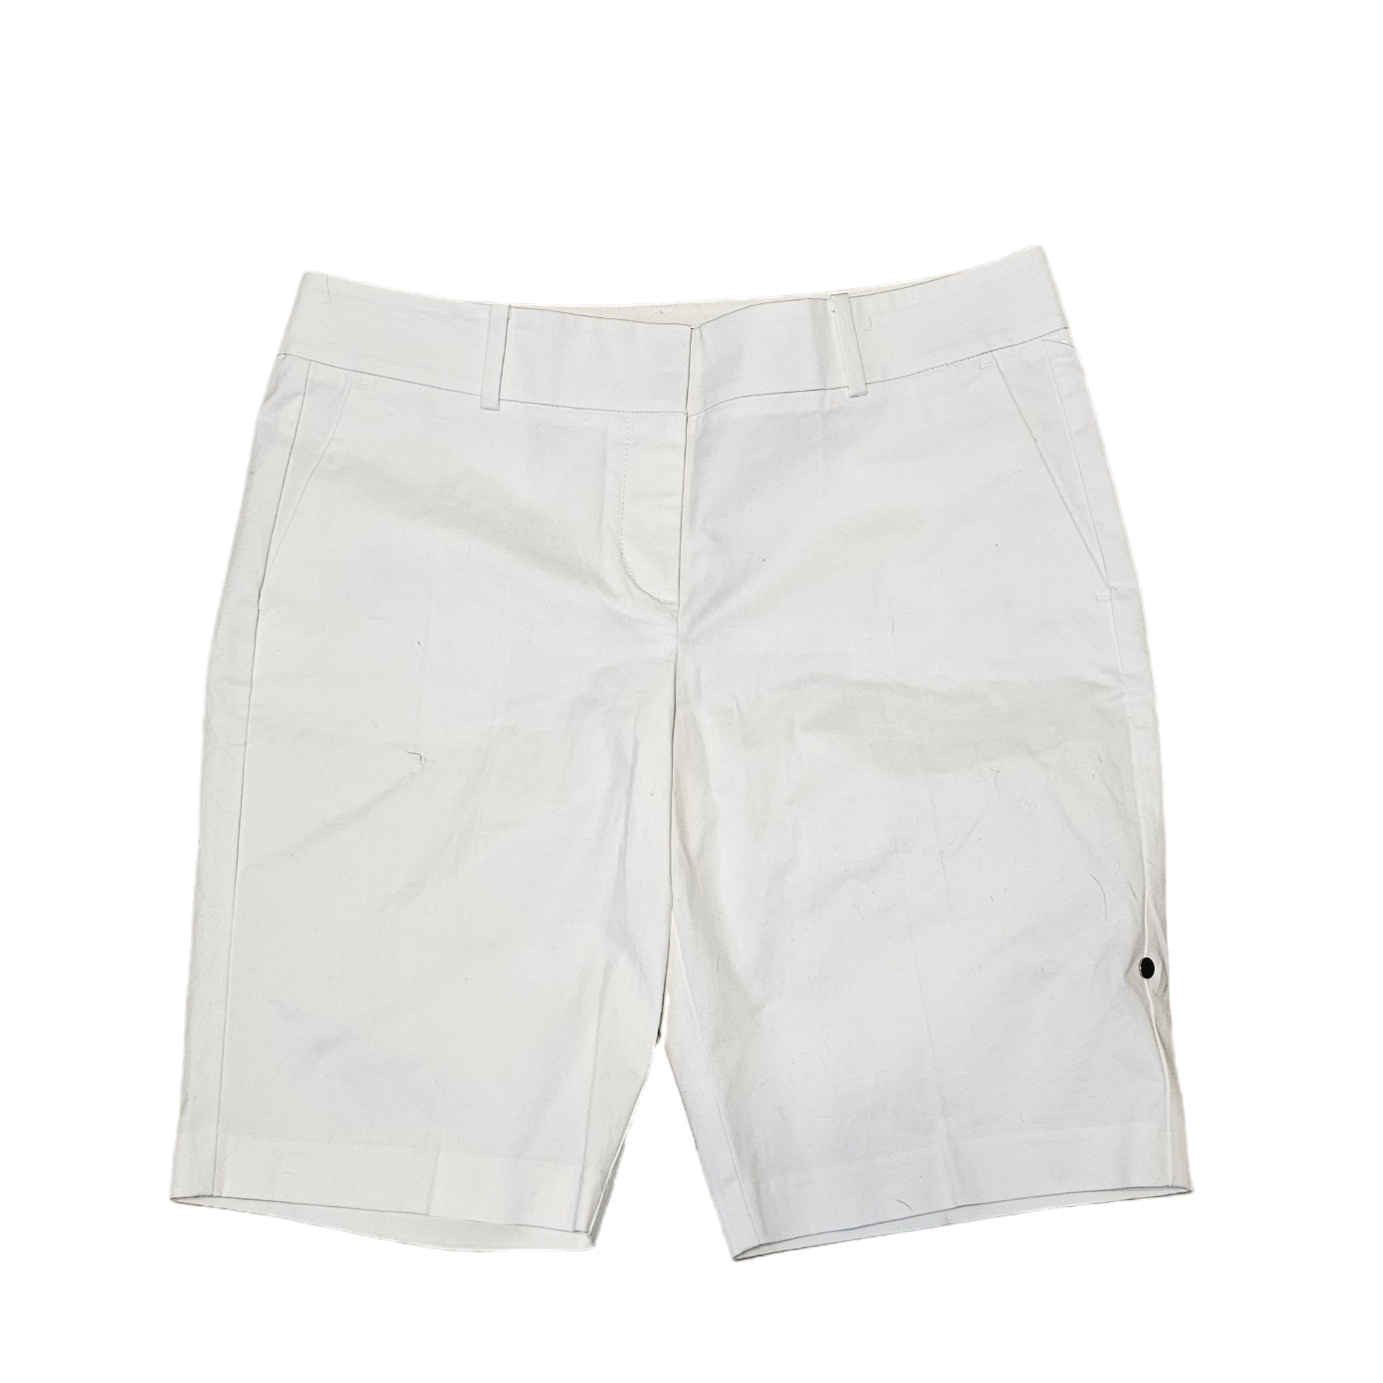 Shorts By Ann Taylor  Size: 10